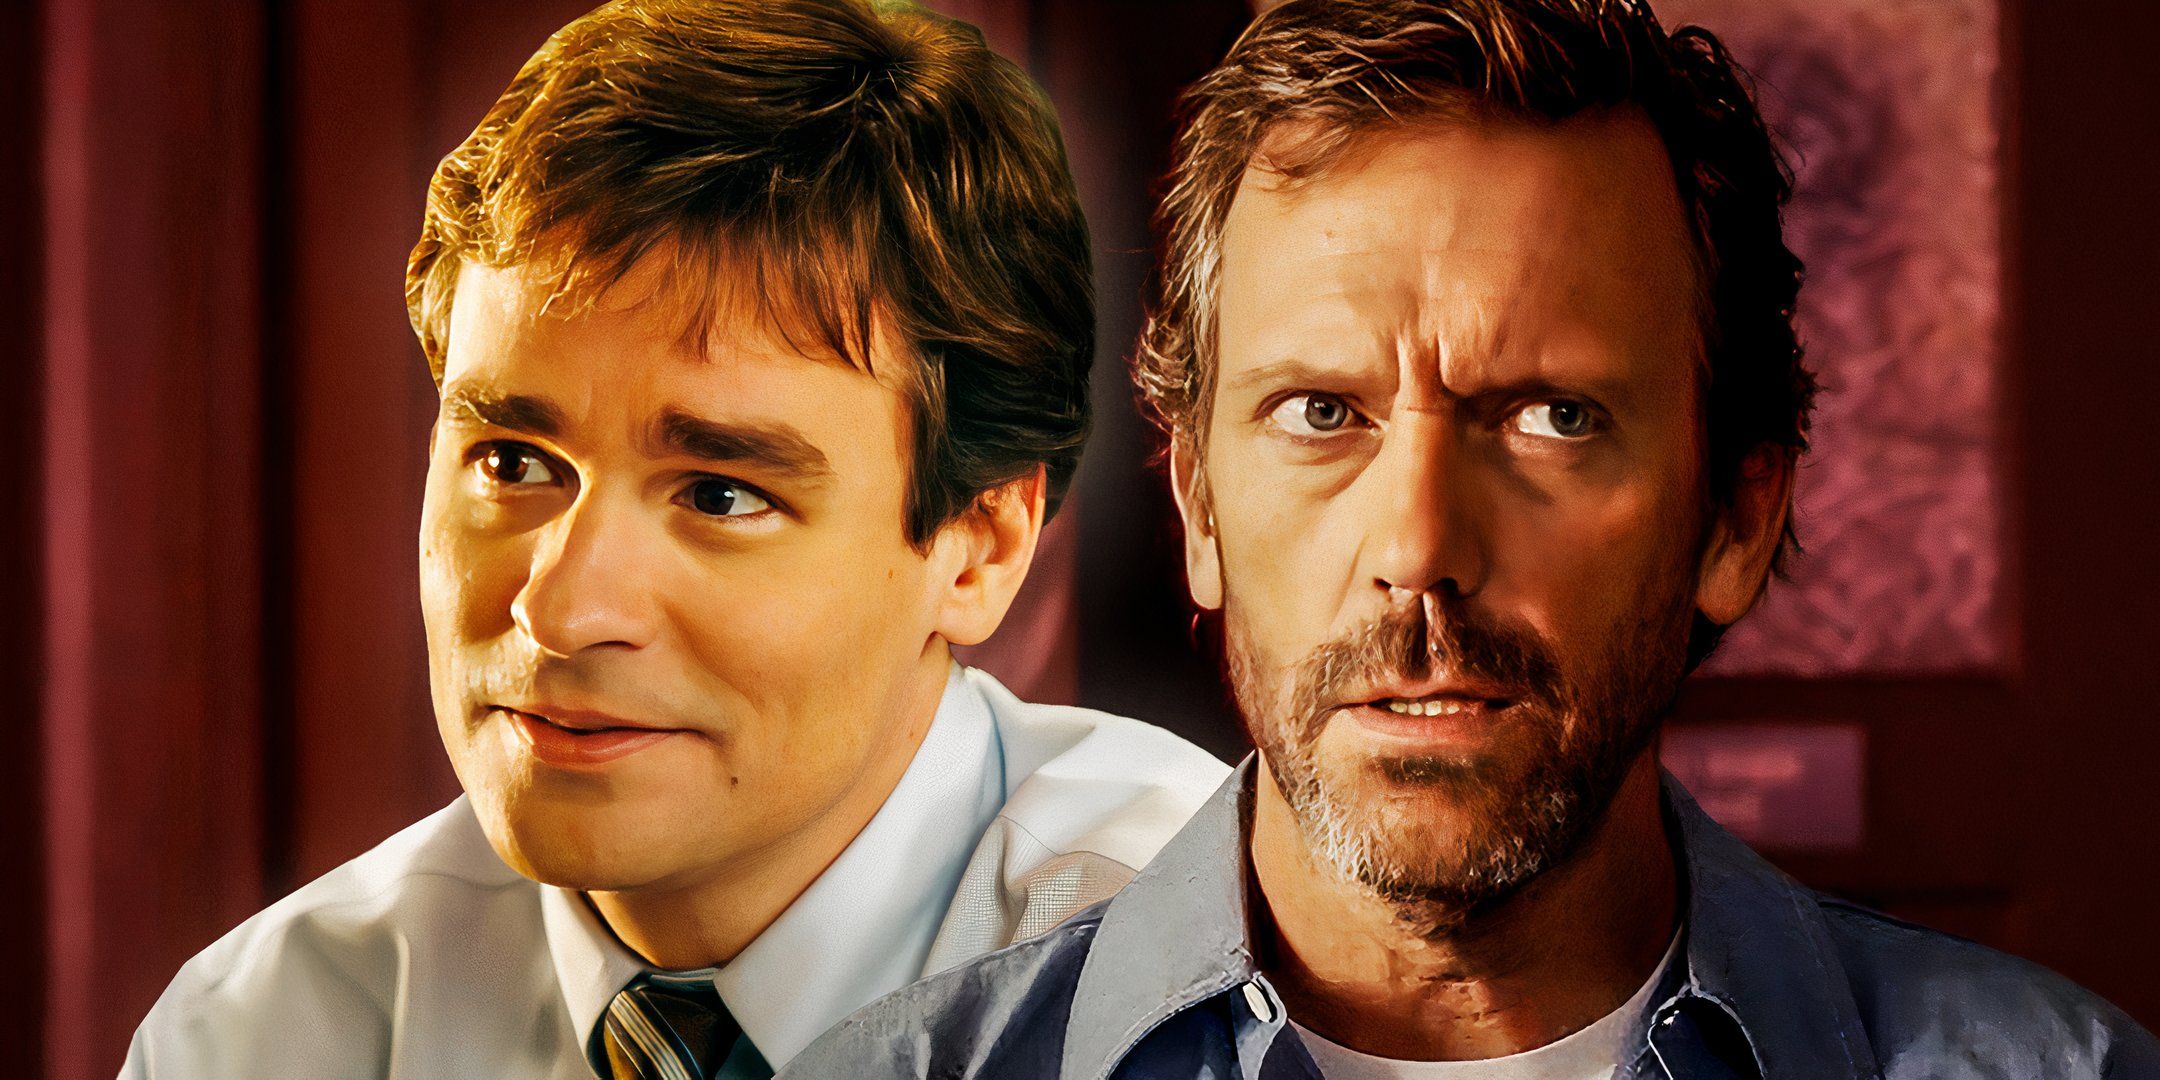 8 House Moments That Made Viewers Quit The Show